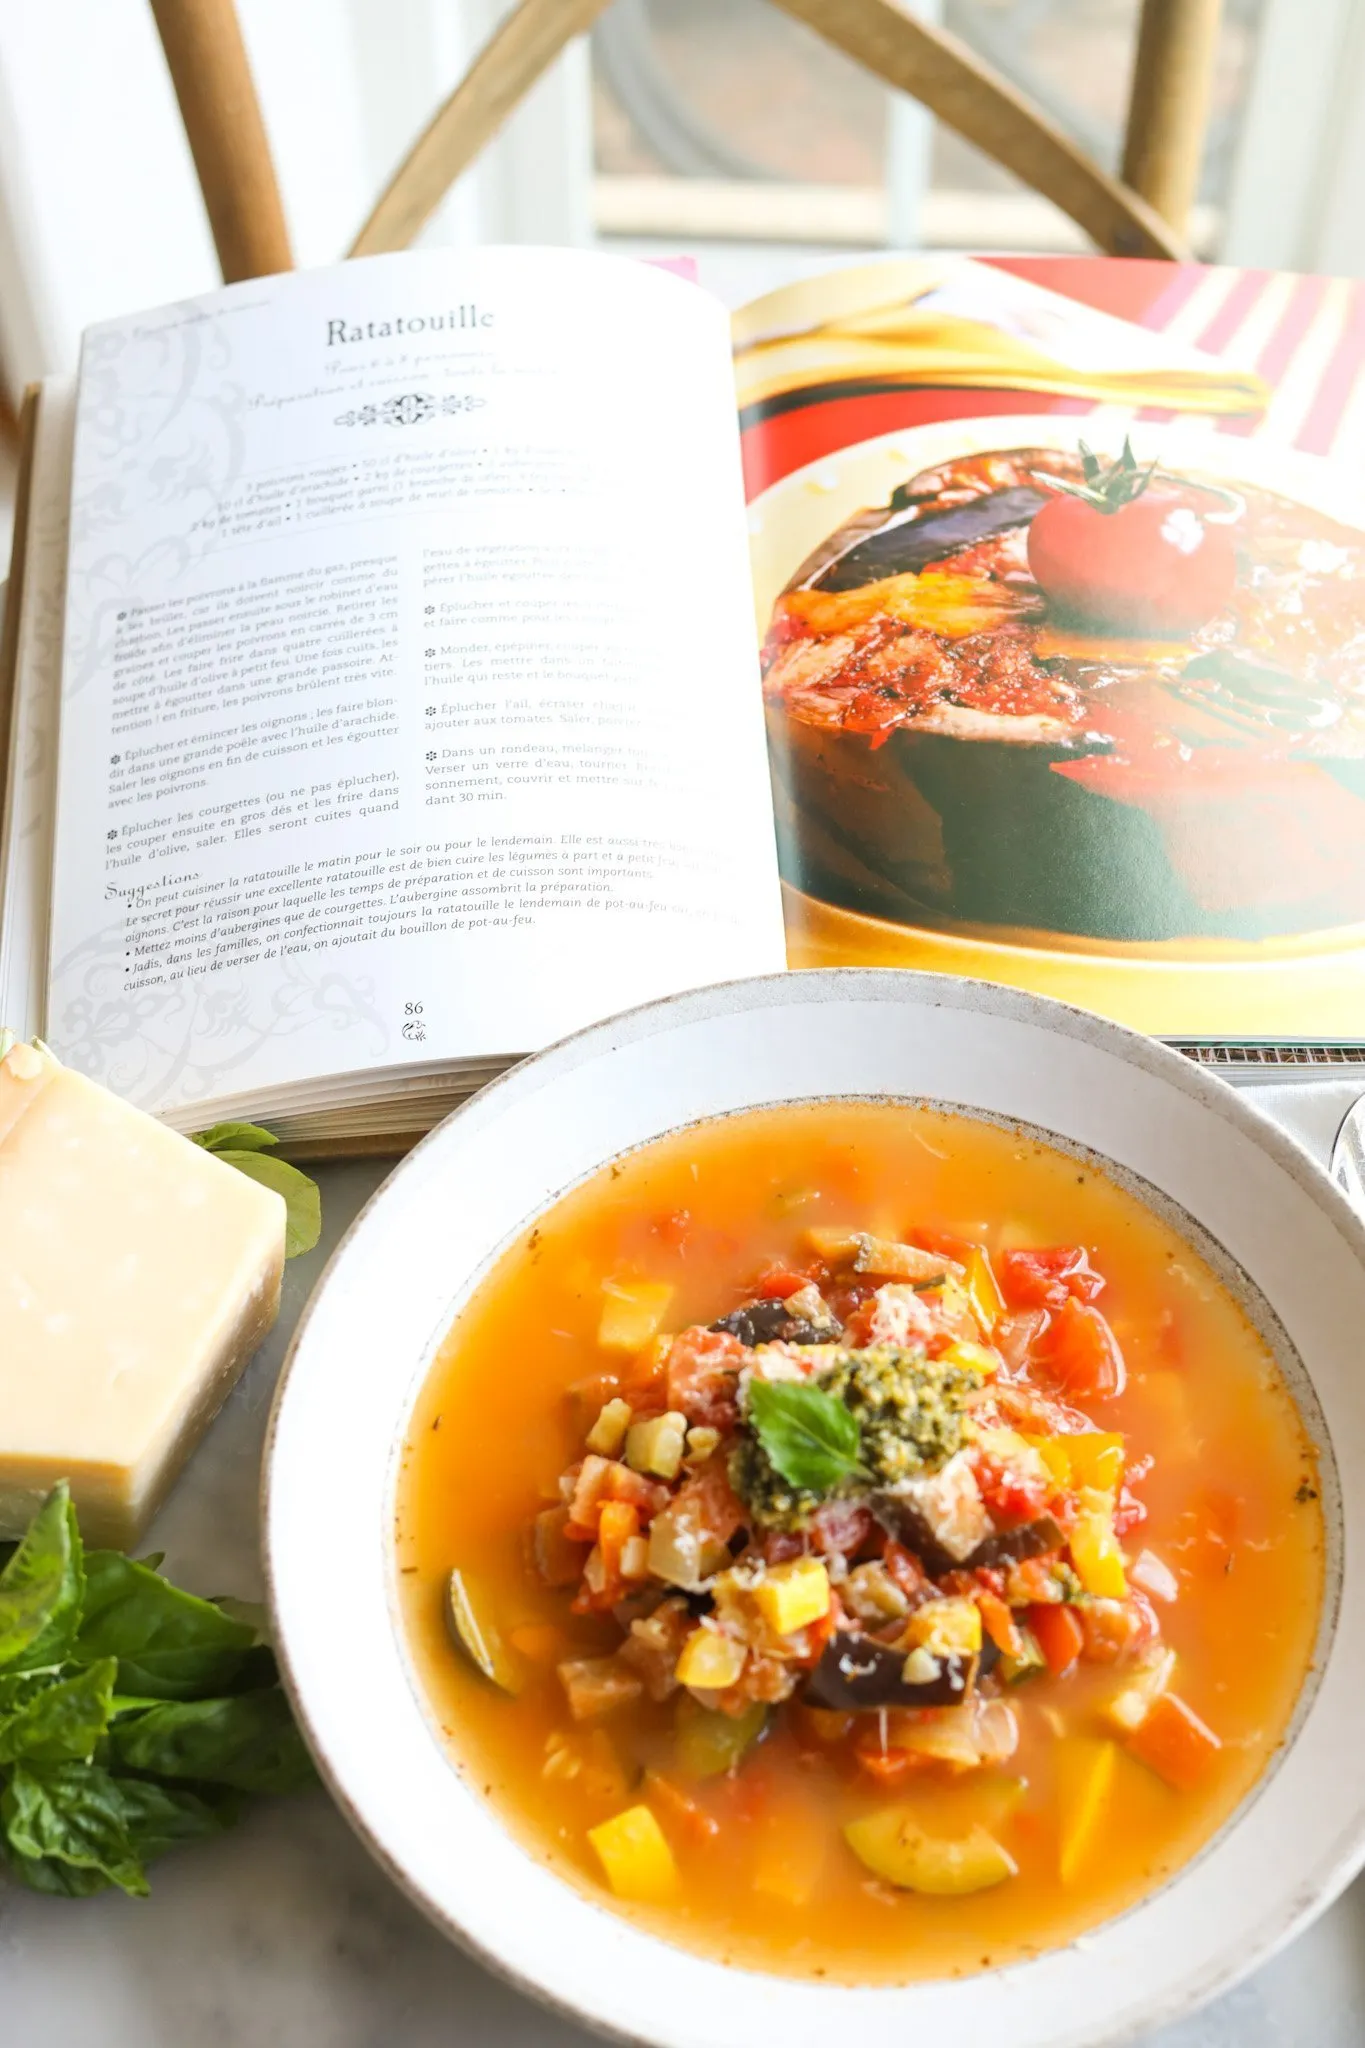 Ratatouille Soup in a bowl next to parmesan and basil with a cookbook open to a ratatouille recipe